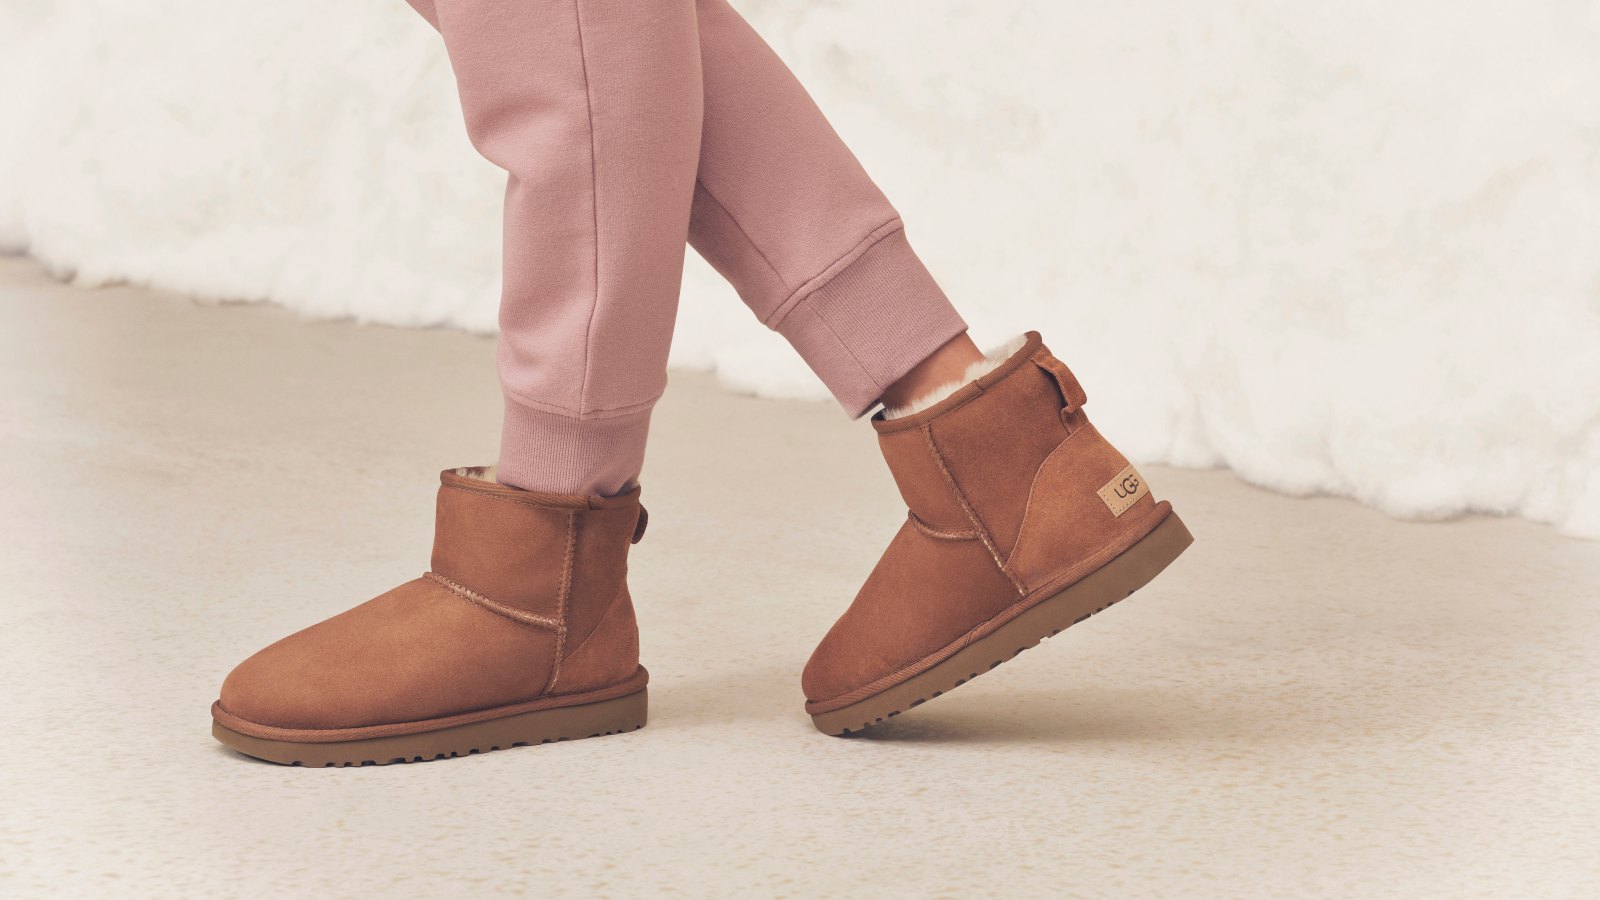 17 Pants to Wear With Ugg Boots: Stylish and Functional